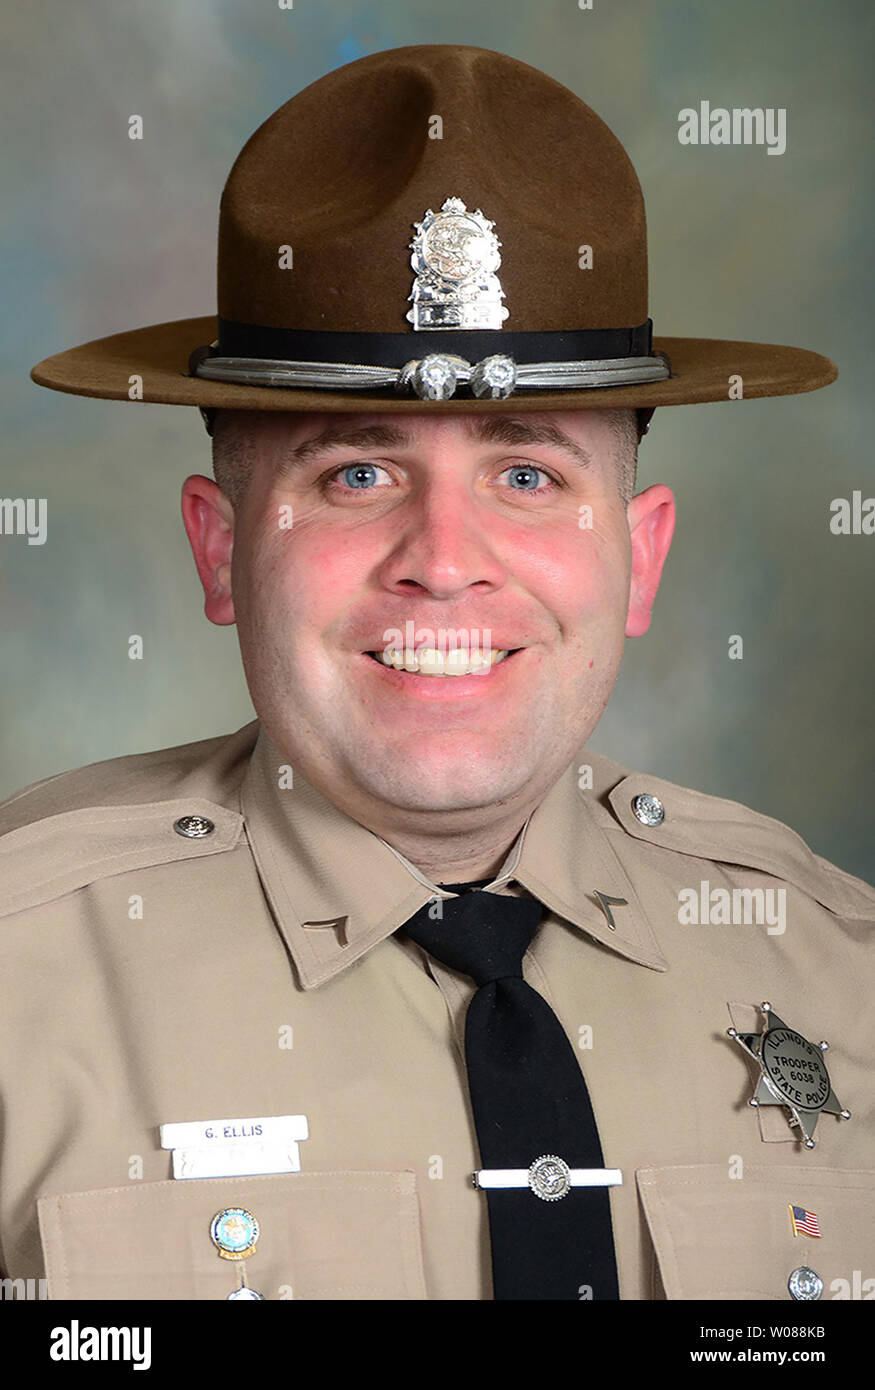 Trooper Gerald Ellis, 36, an 11-year veteran of the Illinois State Police, was killed after being hit head-on by a wrong-way driver traveling eastbound on I-94, near Libertyville, Illinois on March 30, 2019. The crash comes two days after Trooper Brooke Jones-Story was struck and killed by a semitrailer near Rockford, Illinois. Ellis is the third trooper to die in an accident in 2019, and the 16th trooper to be hit, usually on the side of the road, this year.  Photo by Illinois State Police/UPI Stock Photo